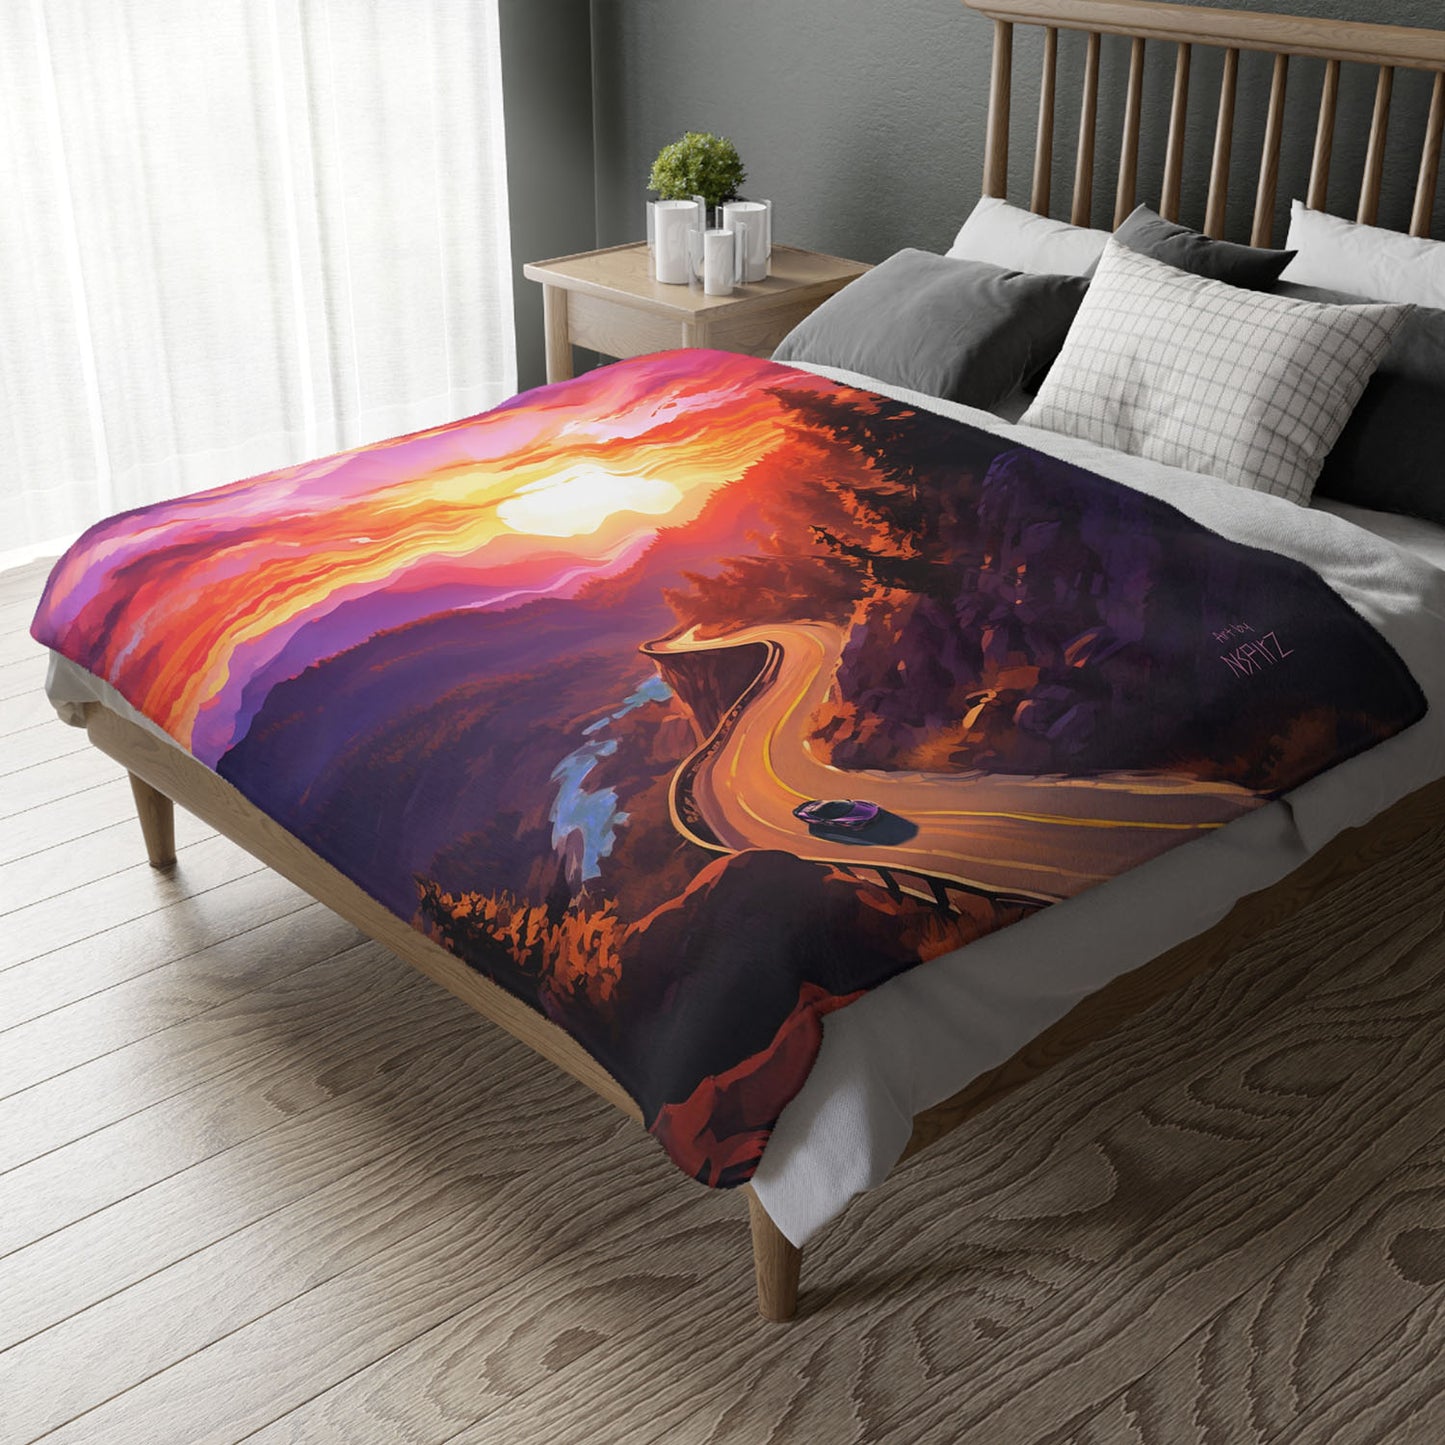 Sports Car Dreams (Exclusive - Double Sided Original Art Blanket™)